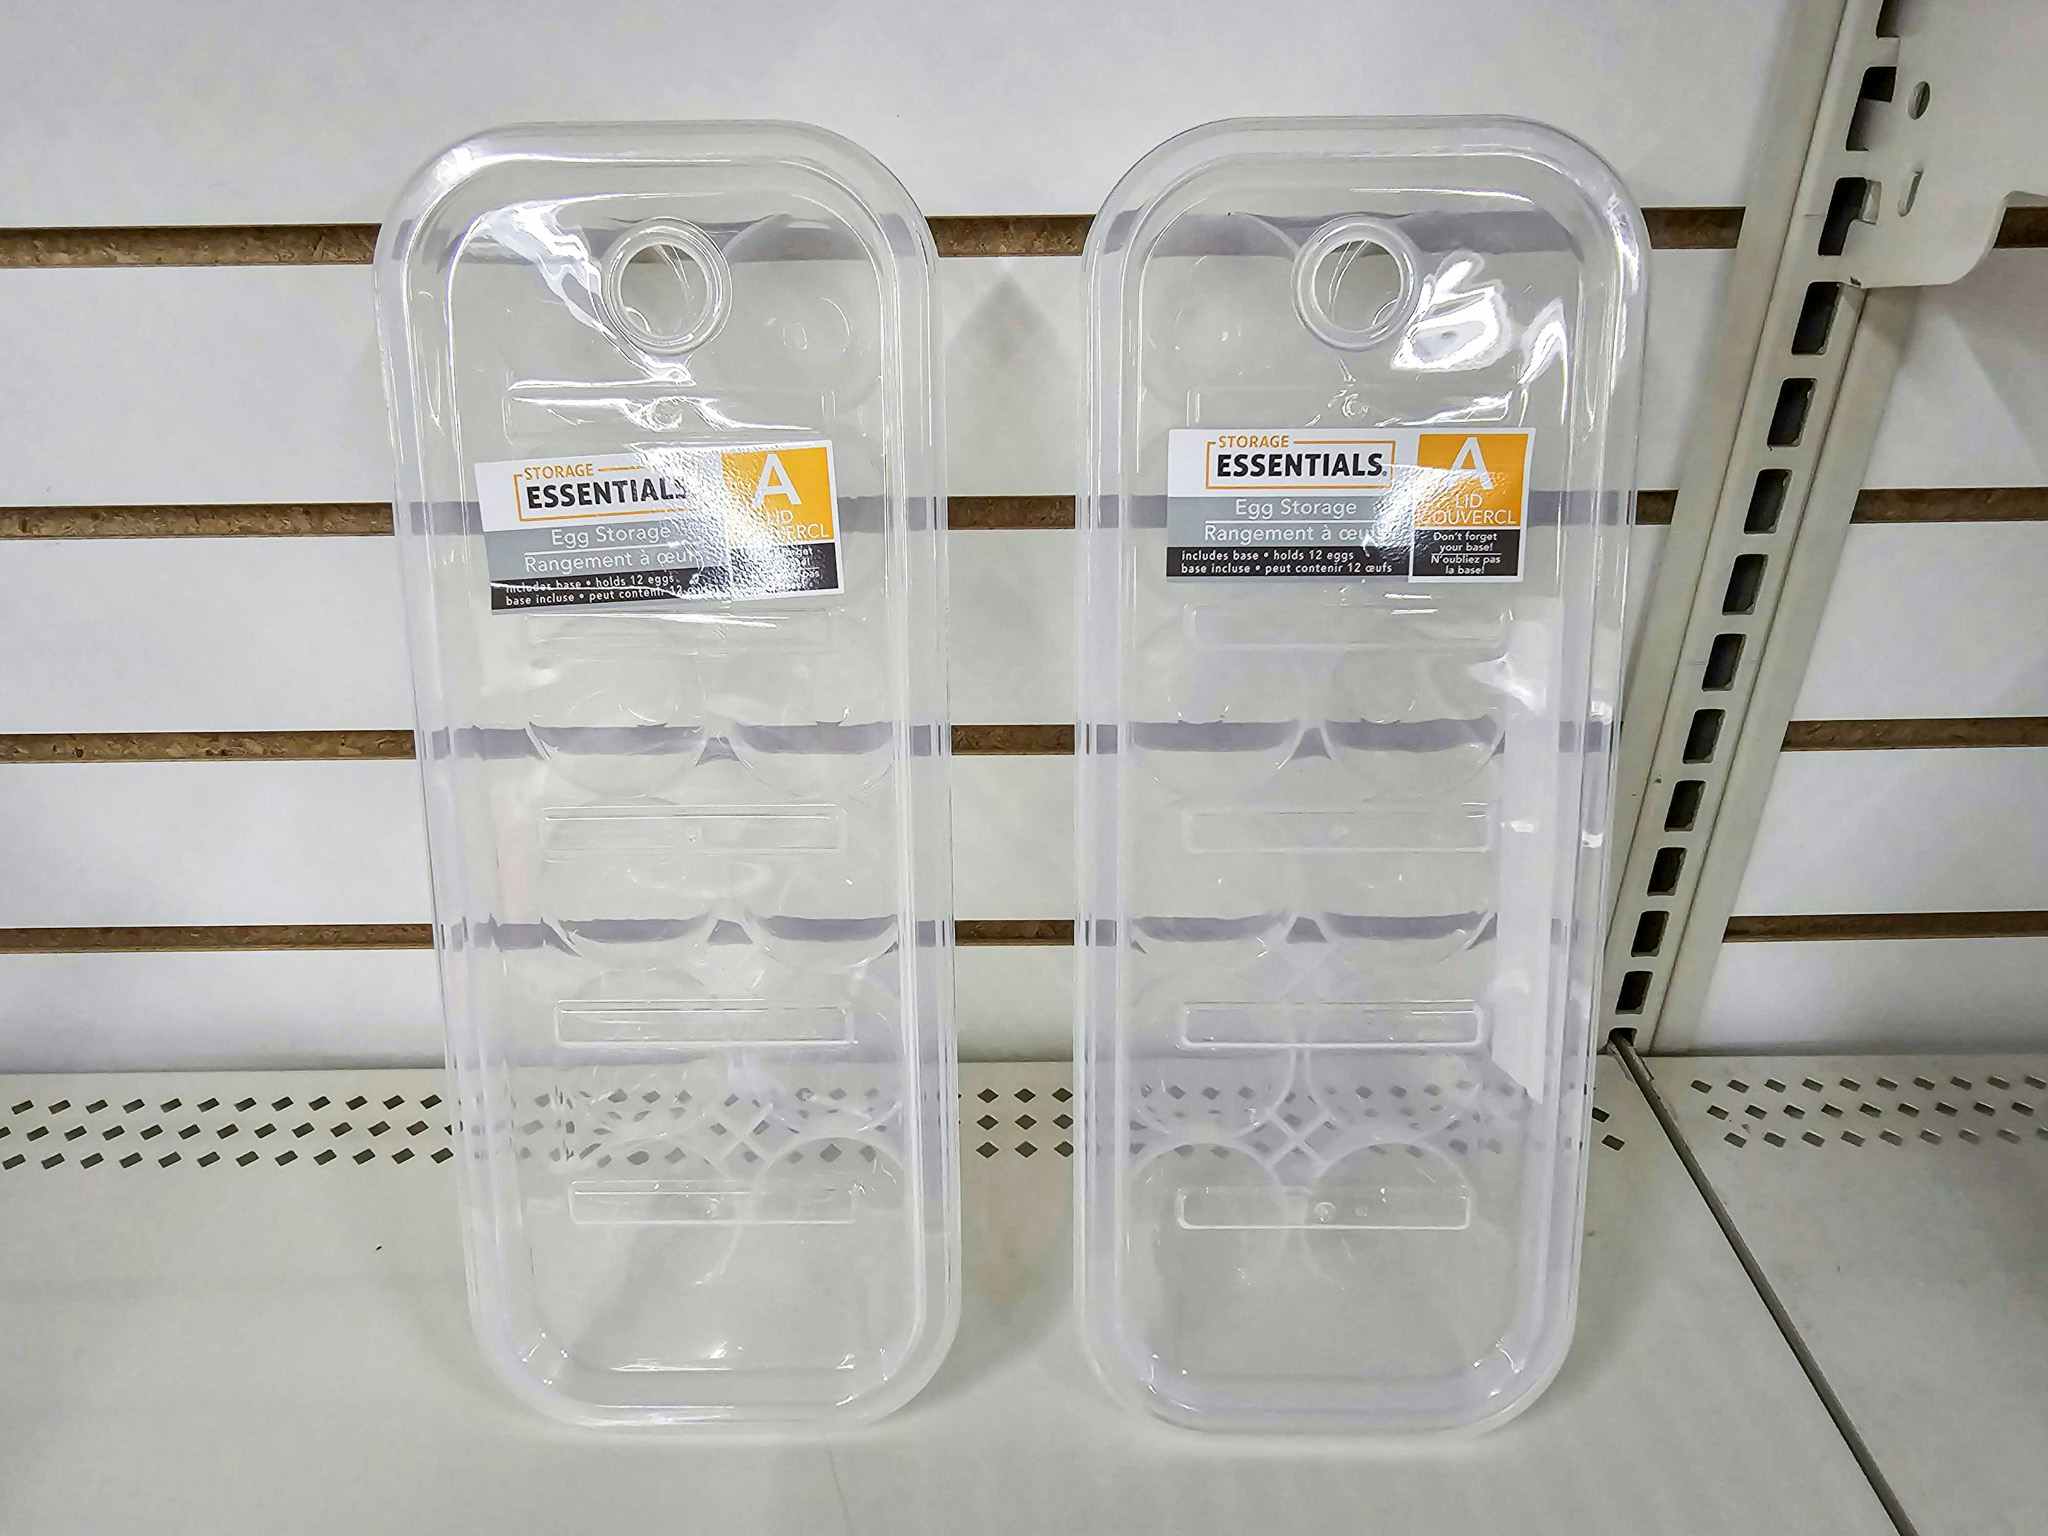 egg storage containers on a shelf